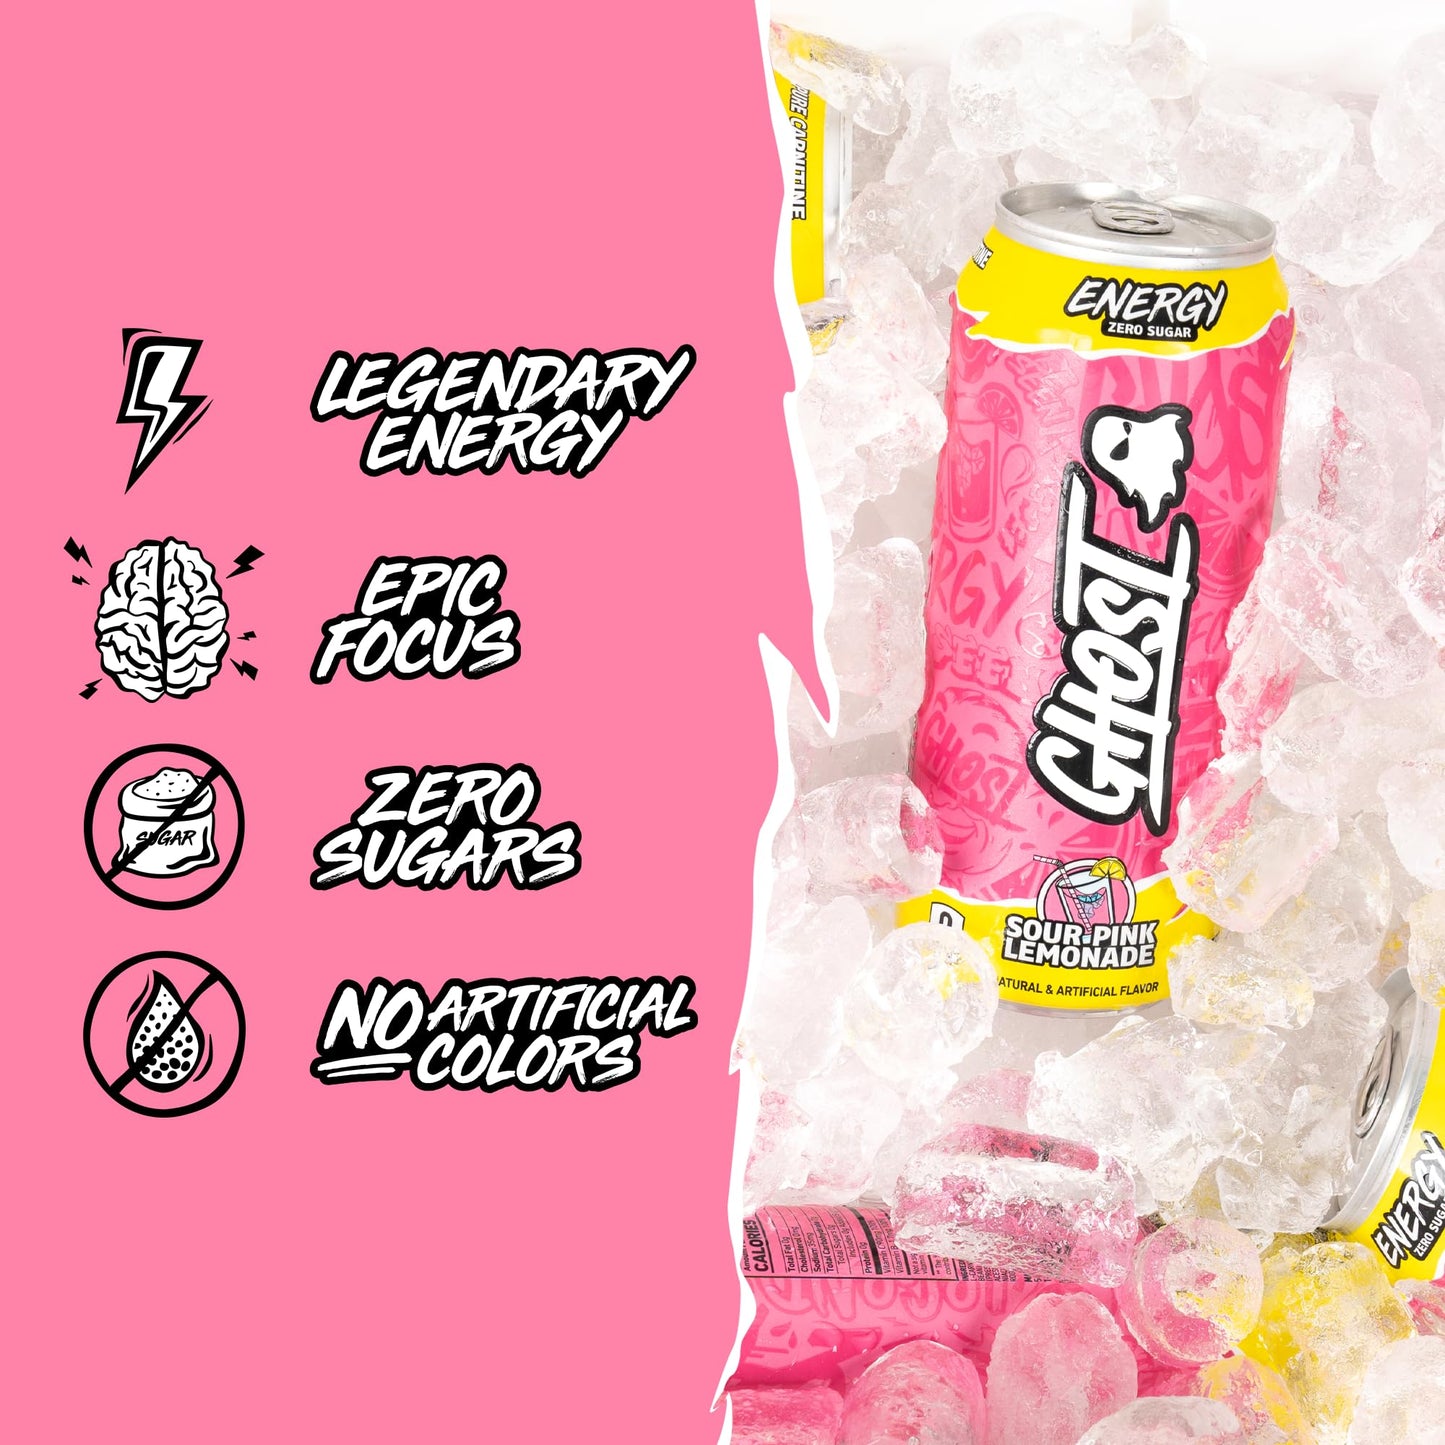 GHOST Energy Drink - 12-Pack, Sour Pink Lemonade, 16oz Cans - Energy & Focus & No Artificial Colors - 200mg of Natural Caffeine, L-Carnitine & Taurine - Gluten-Free & Vegan